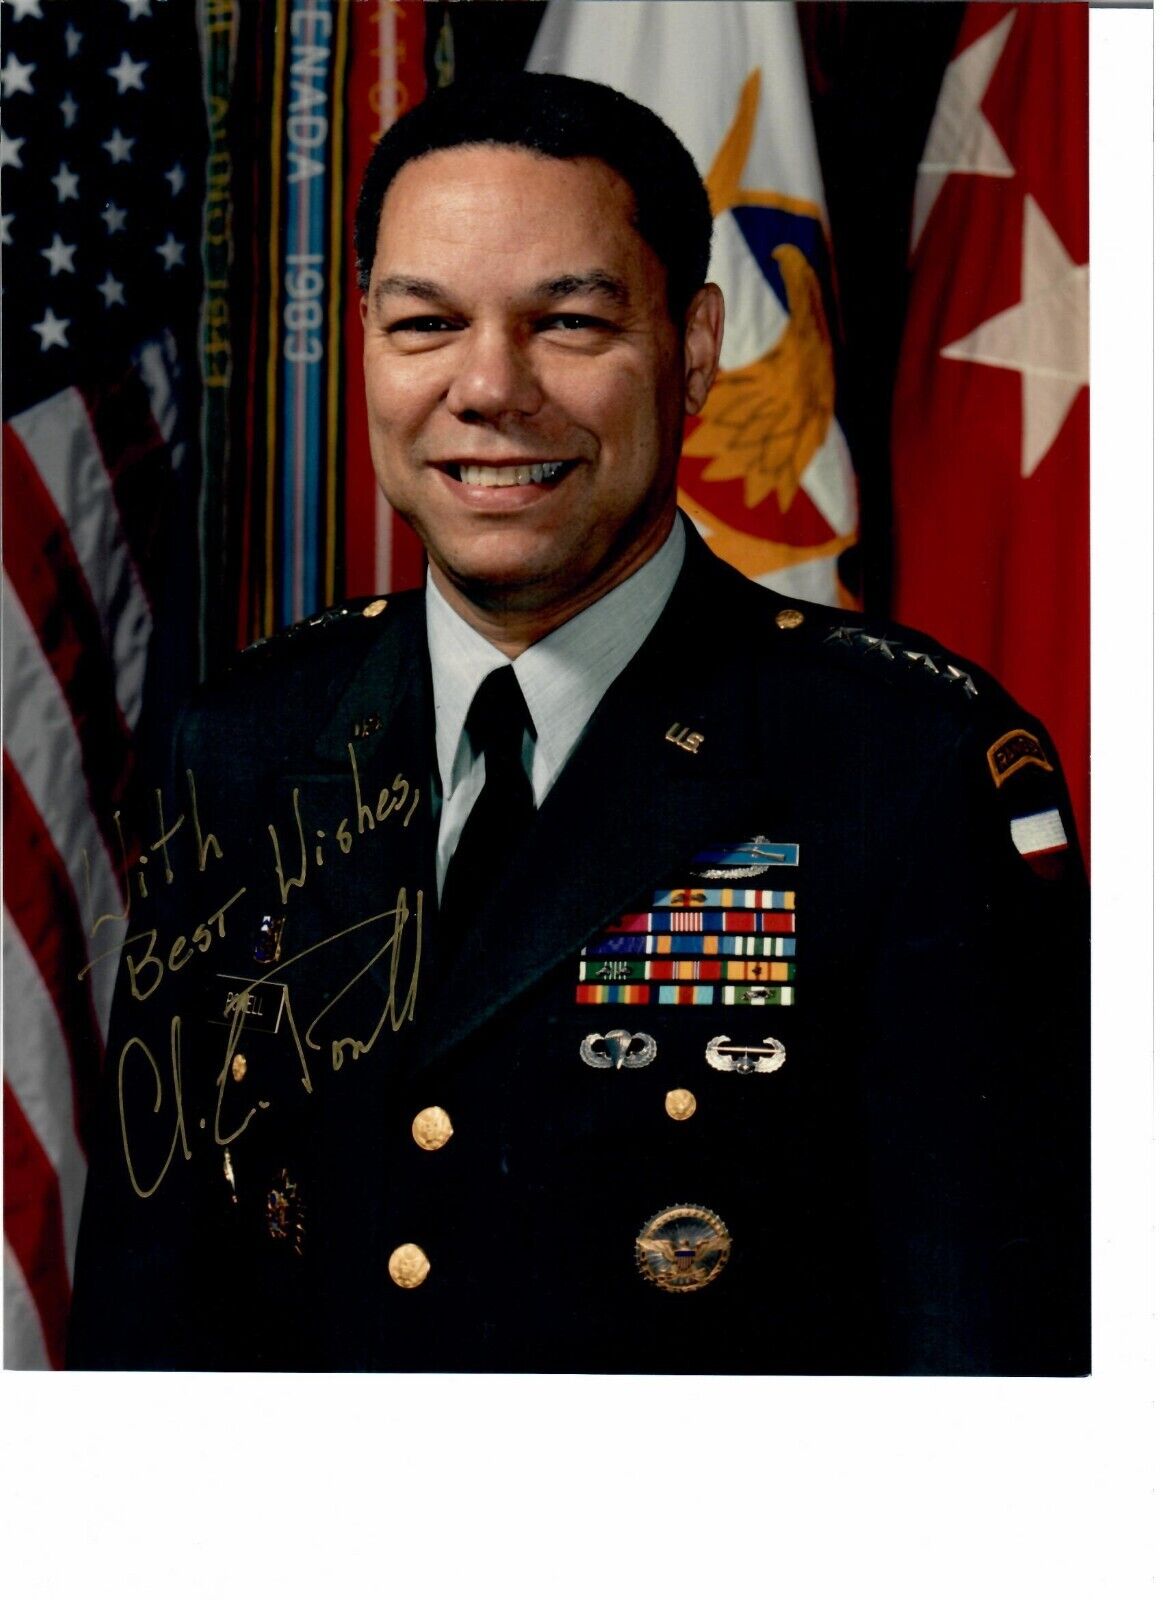 GENERAL COLIN POWELL, AUTOGRAPHED 8x10 PHOTOGRAPH.